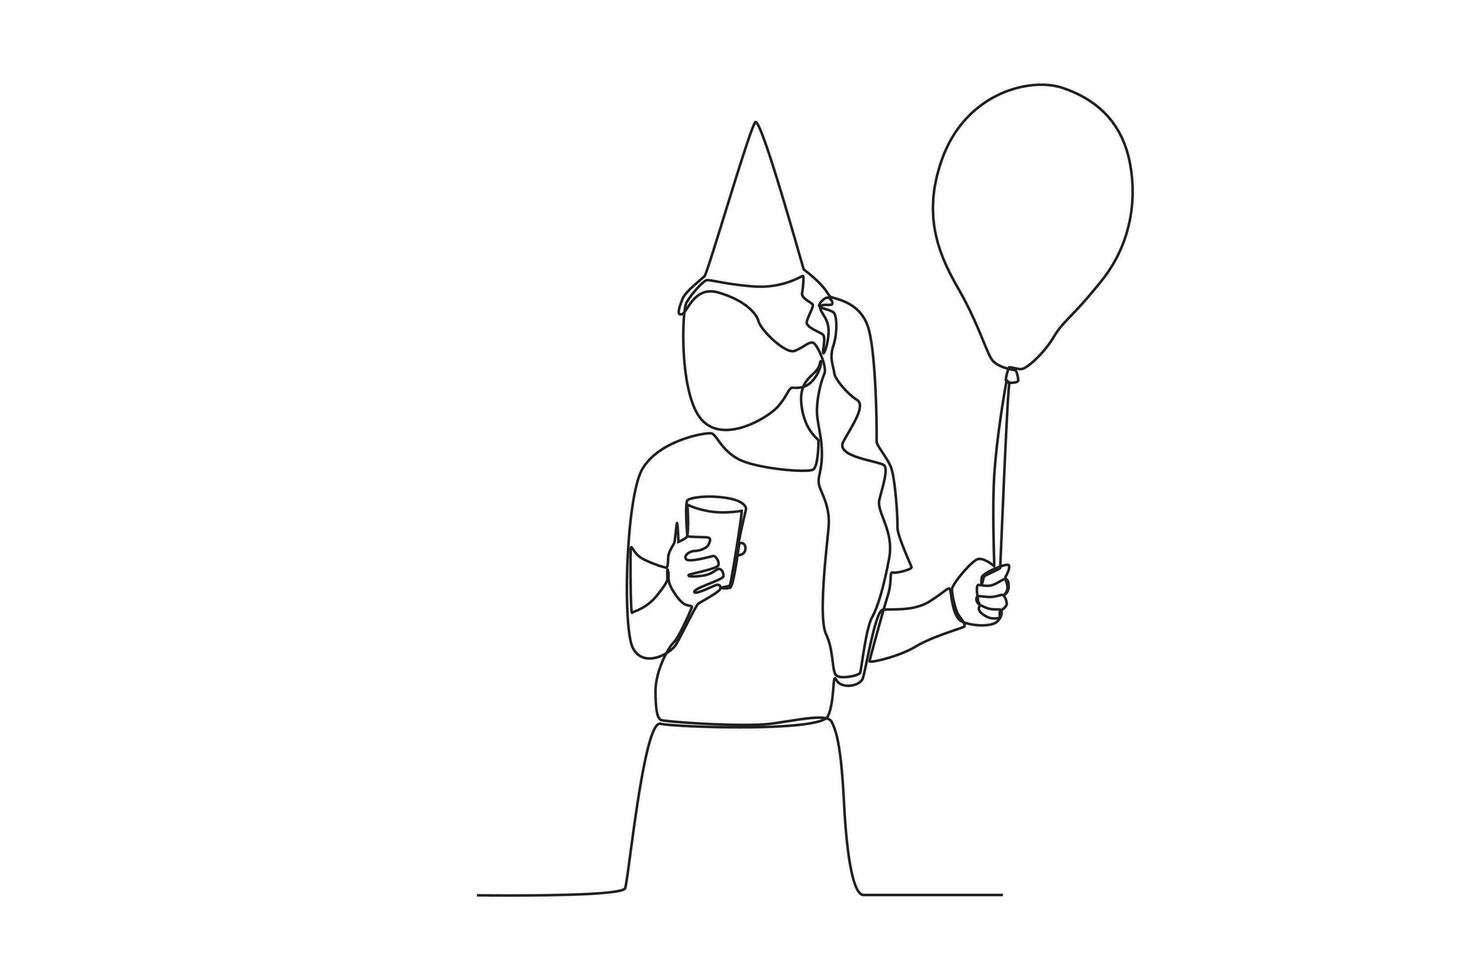 A woman holding a balloon and a drink vector